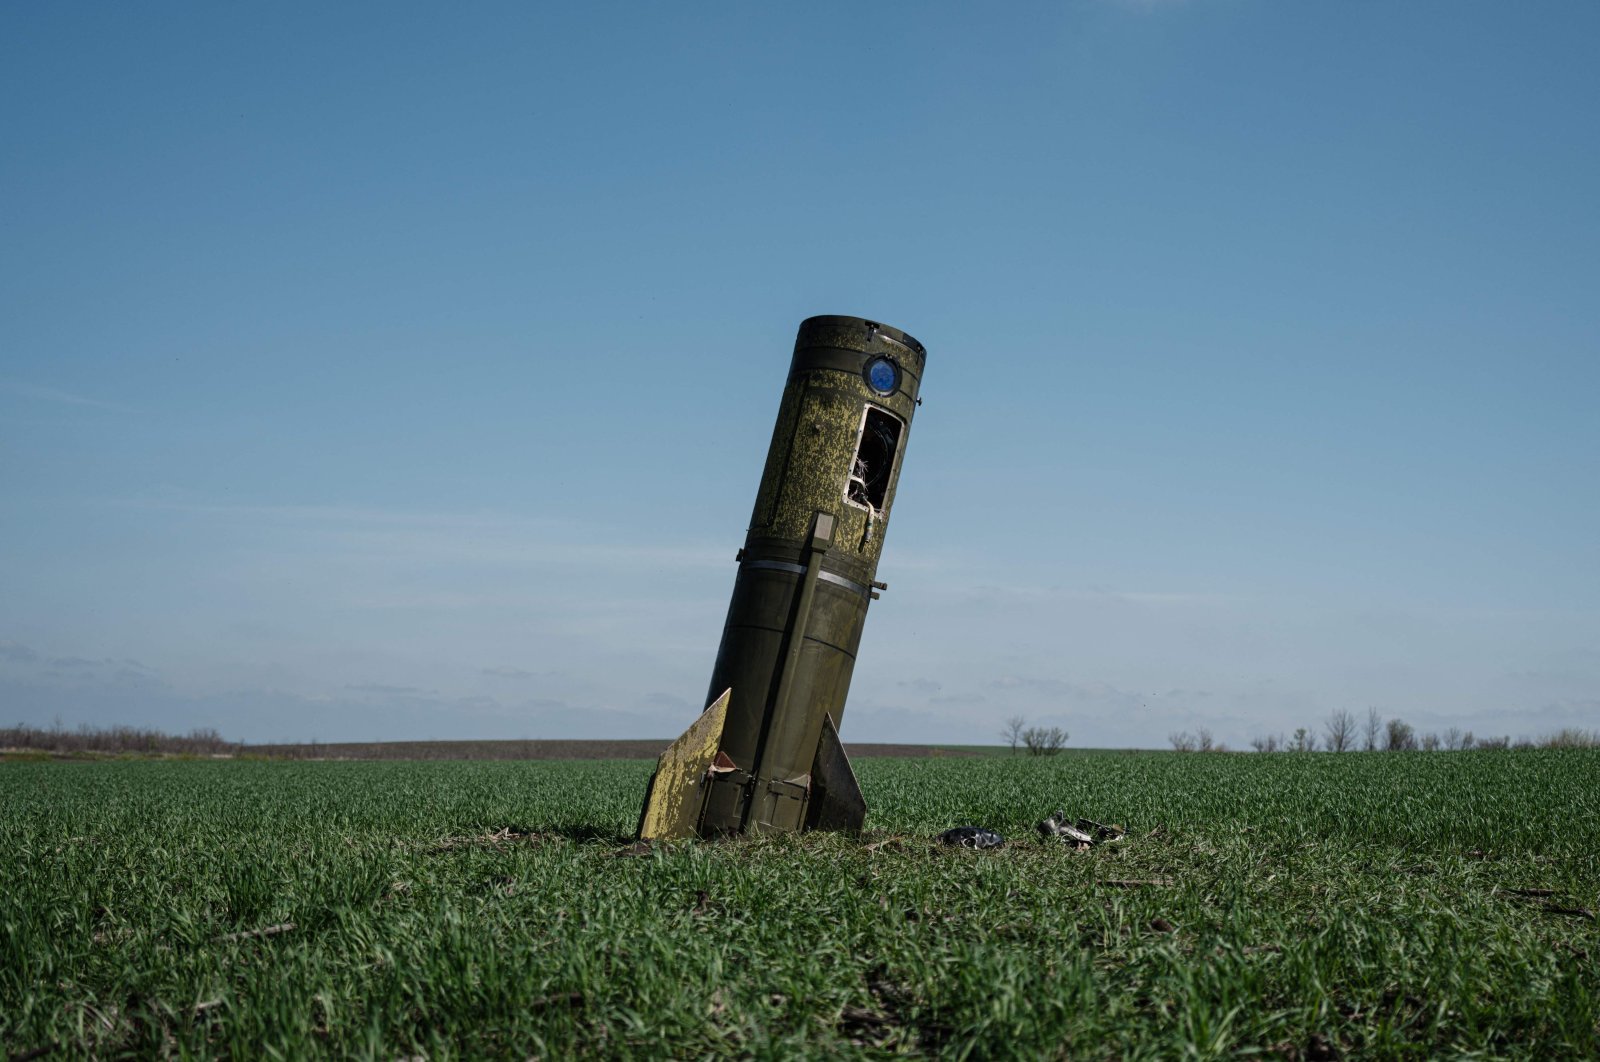 A Russian ballistic missile&#039;s booster stage that fell in a field in Bohodarove, eastern Ukraine, amid the Russian invasion of Ukraine, April 25, 2022. (AFP Photo)